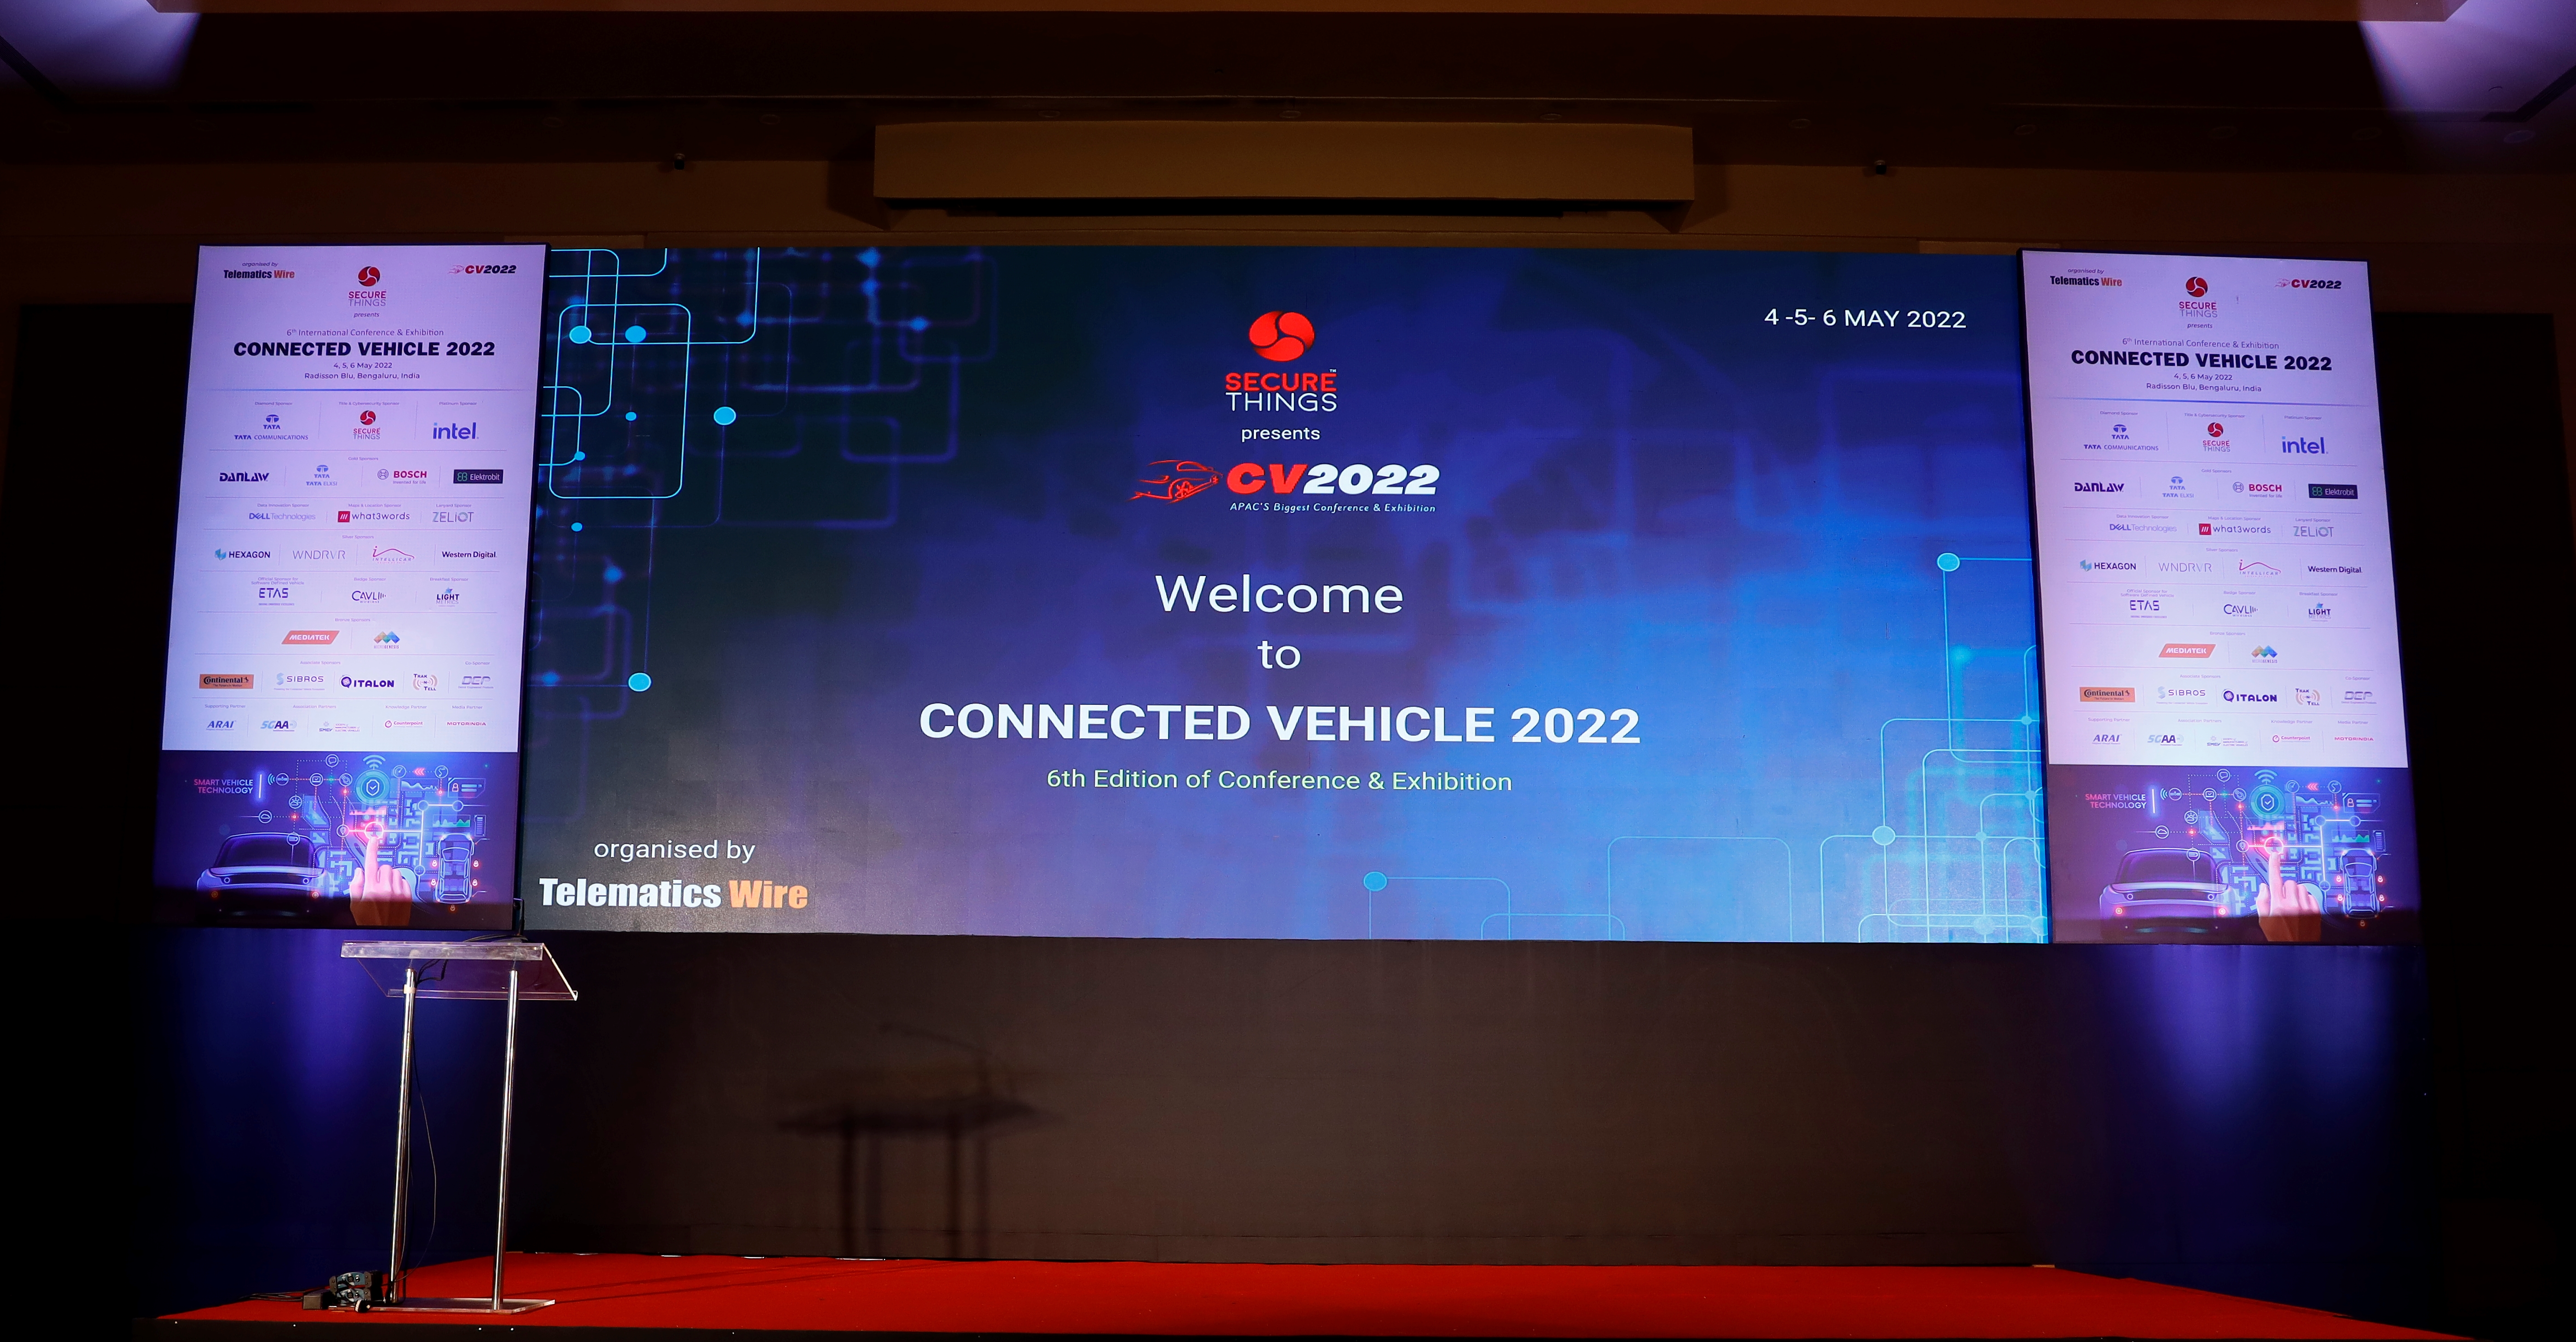 Connected-Vehicle-2022-Summit-From-ADAS-to-Autonomous-Mobility-Here-are-Some-Key-Takeaways.jpeg